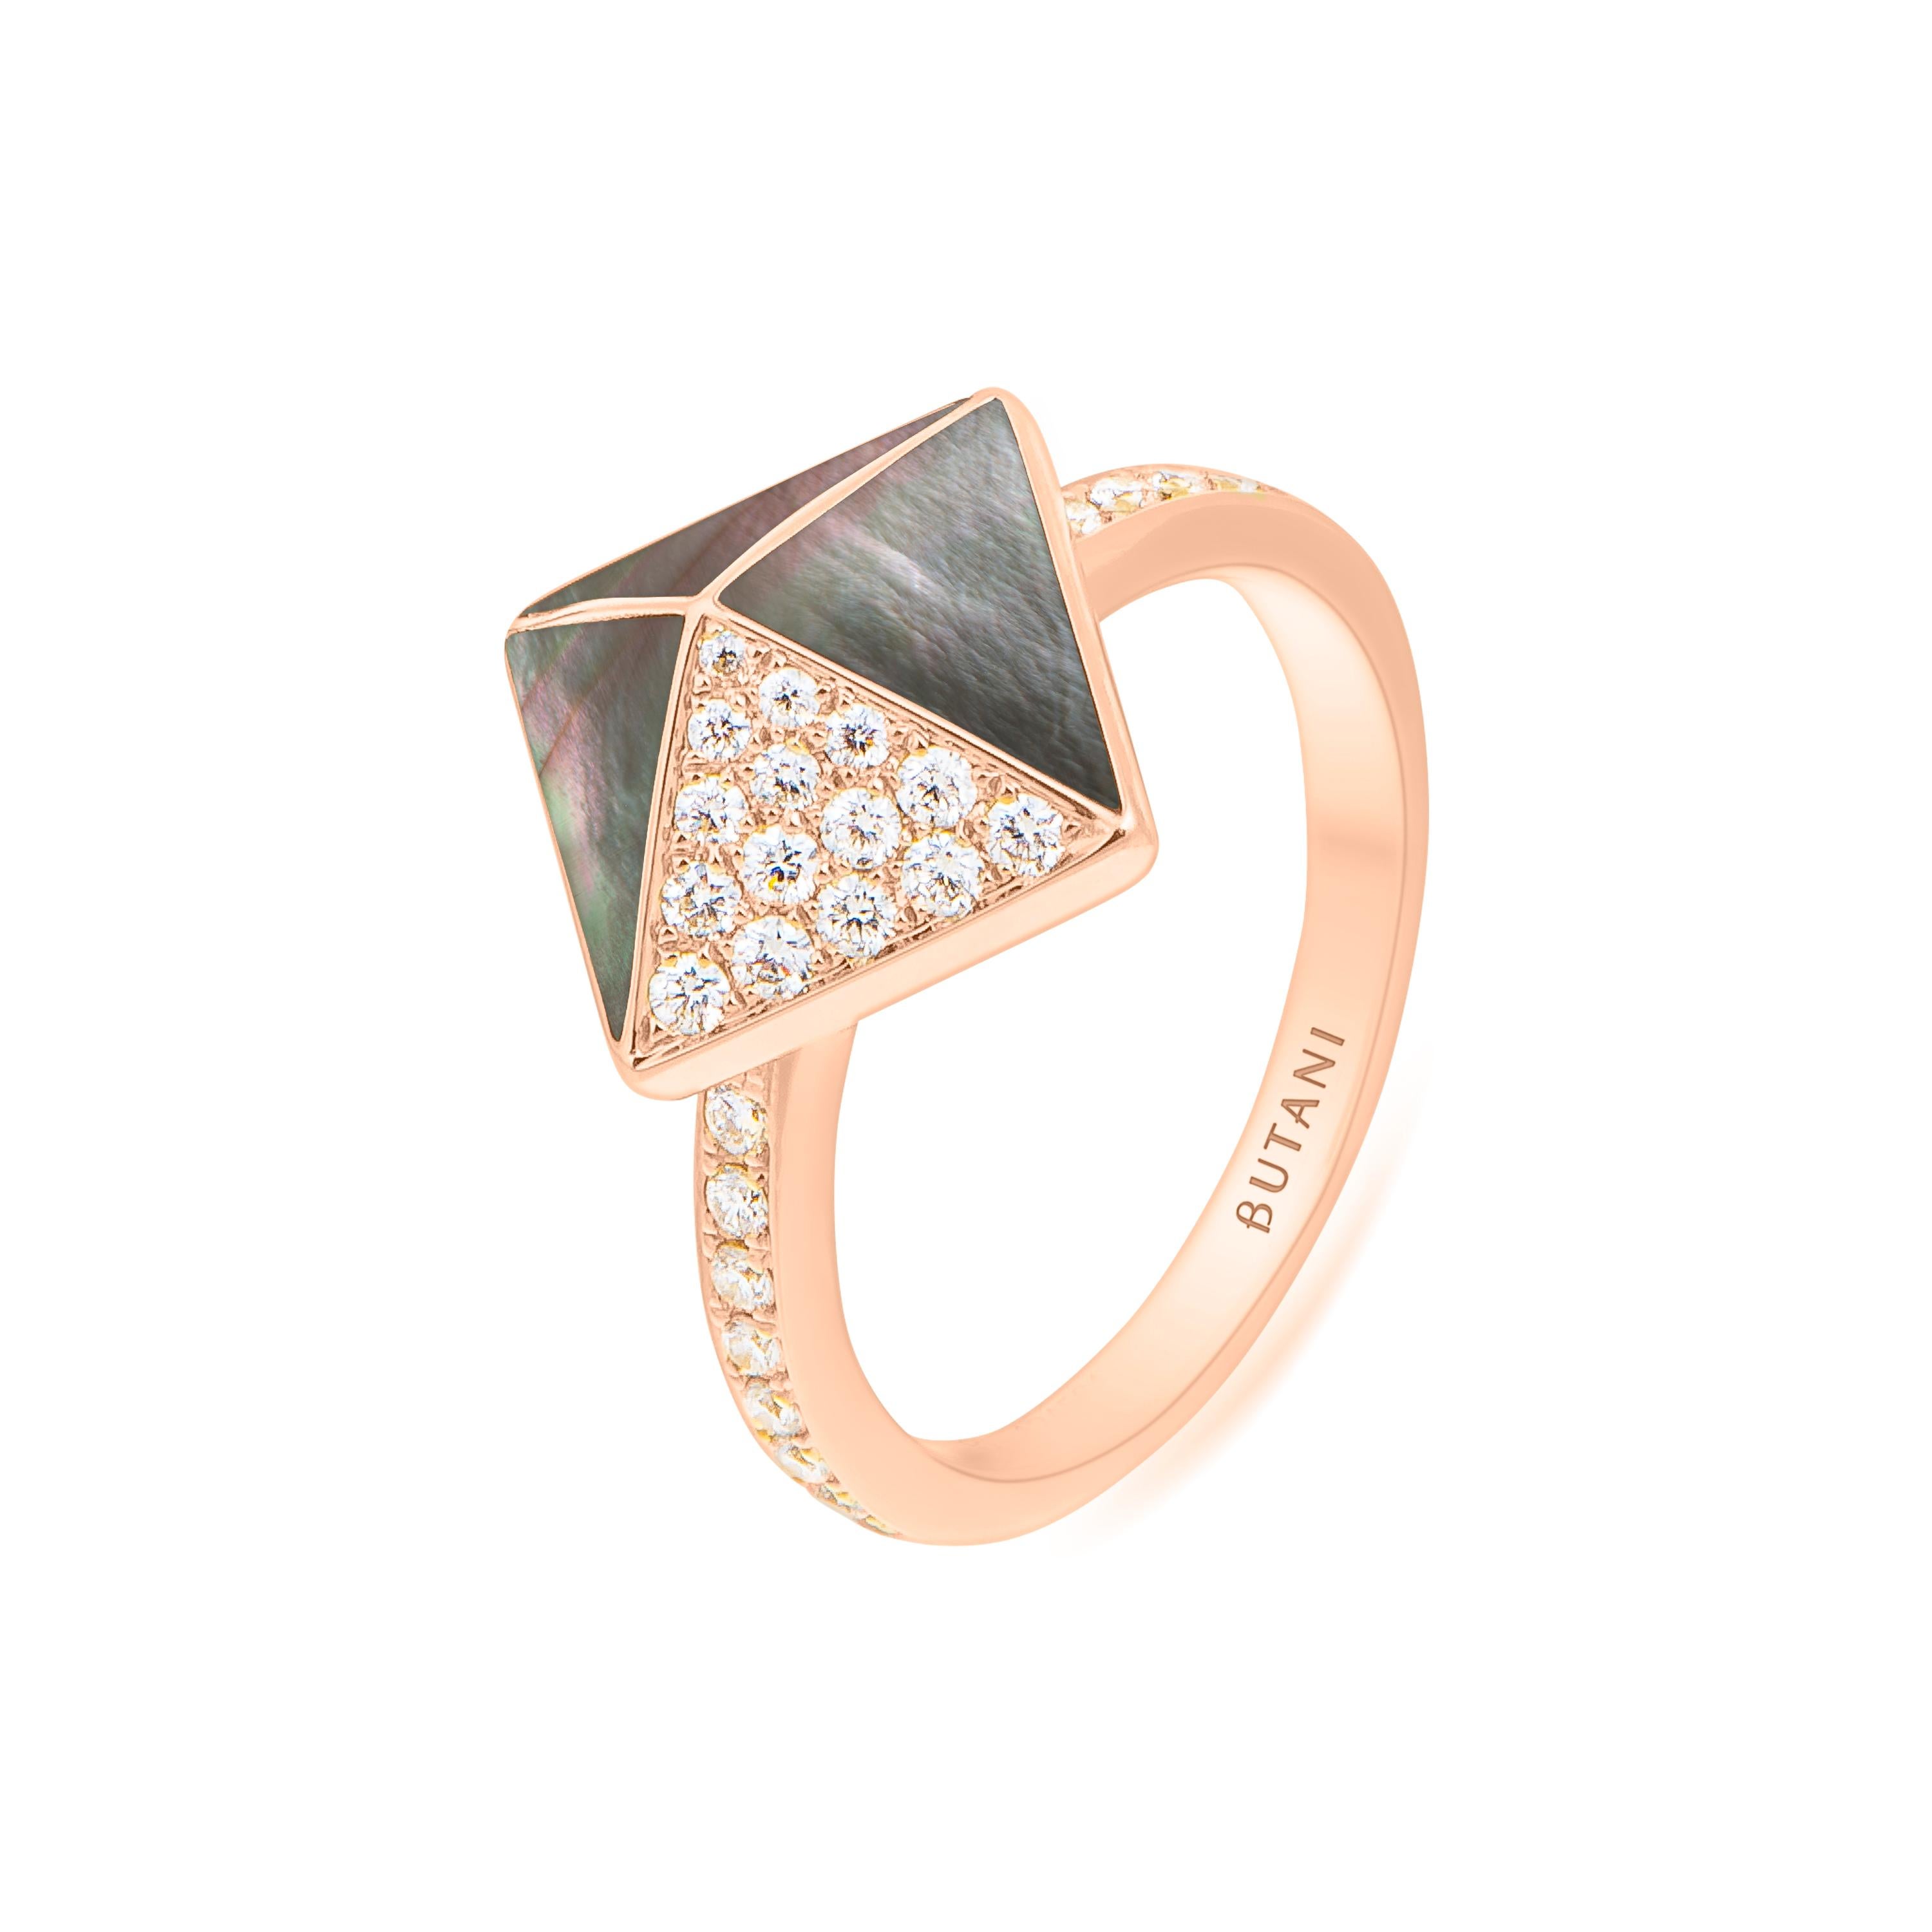 Through graphic, contemporary lines, Butani’s Tetra collection celebrates the beauty of symmetry while reimagining classic motifs of the past. 

With a powerful elegance, the Tetra Apex Ring draws eyes and forms a striking focal point on the finger.